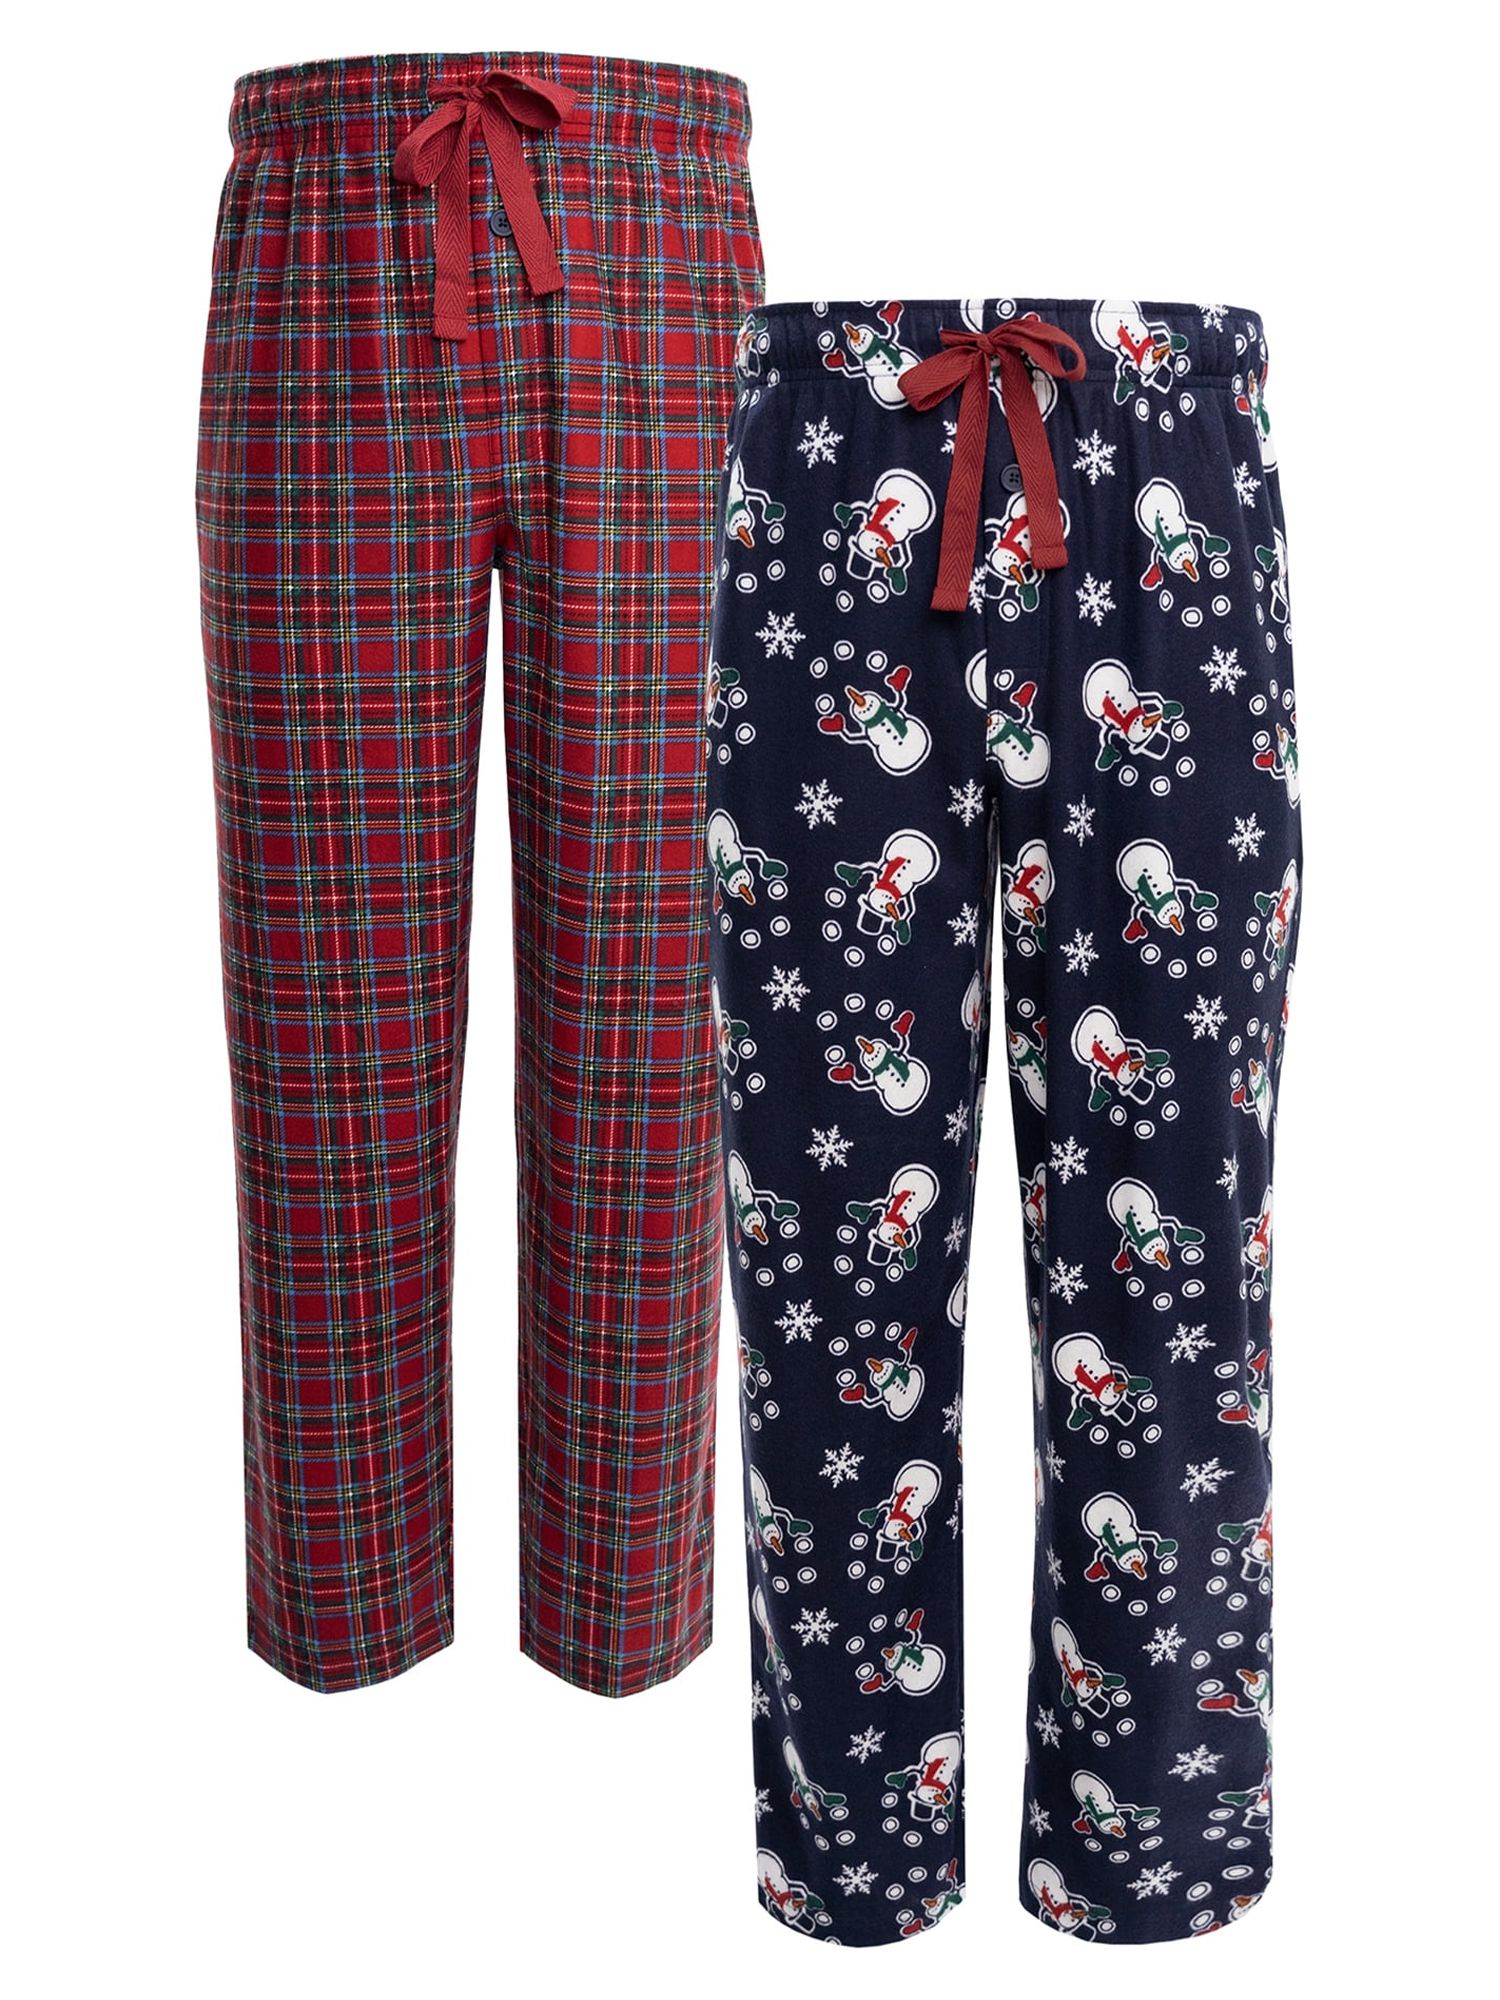 Fruit of the Loom Men's Holiday and Plaid Print Soft Microfleece Pajama Pant 2-Pack Bundle - image 1 of 15